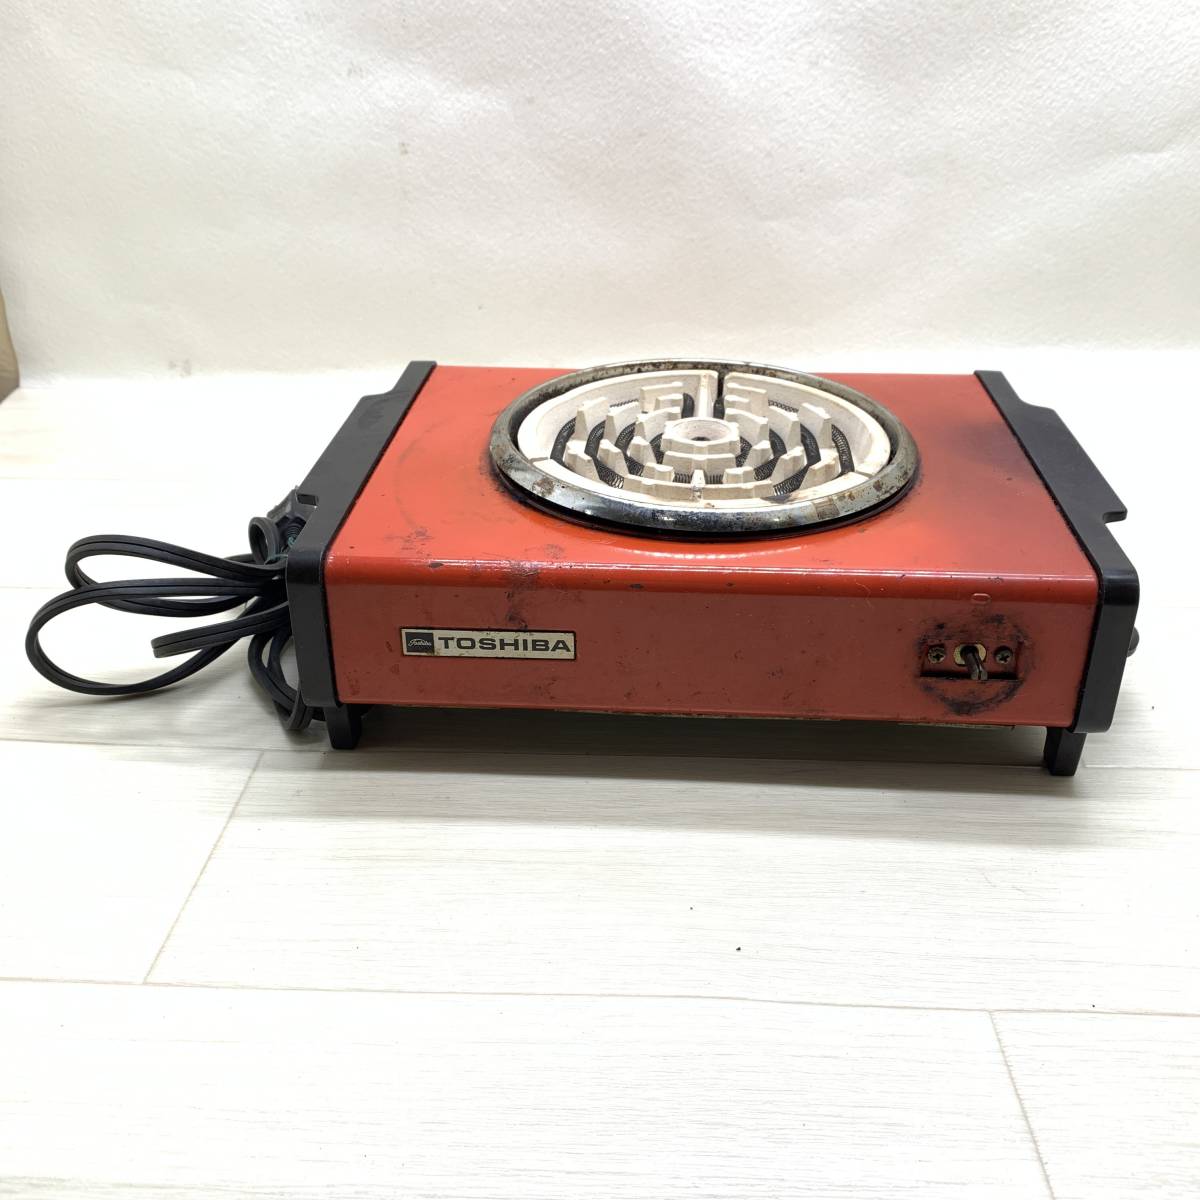 #TOSHIBA Toshiba electric portable cooking stove HP-630 Showa Retro that time thing electric ... cooking machine consumer electronics electric heating vessel Junk #G41493